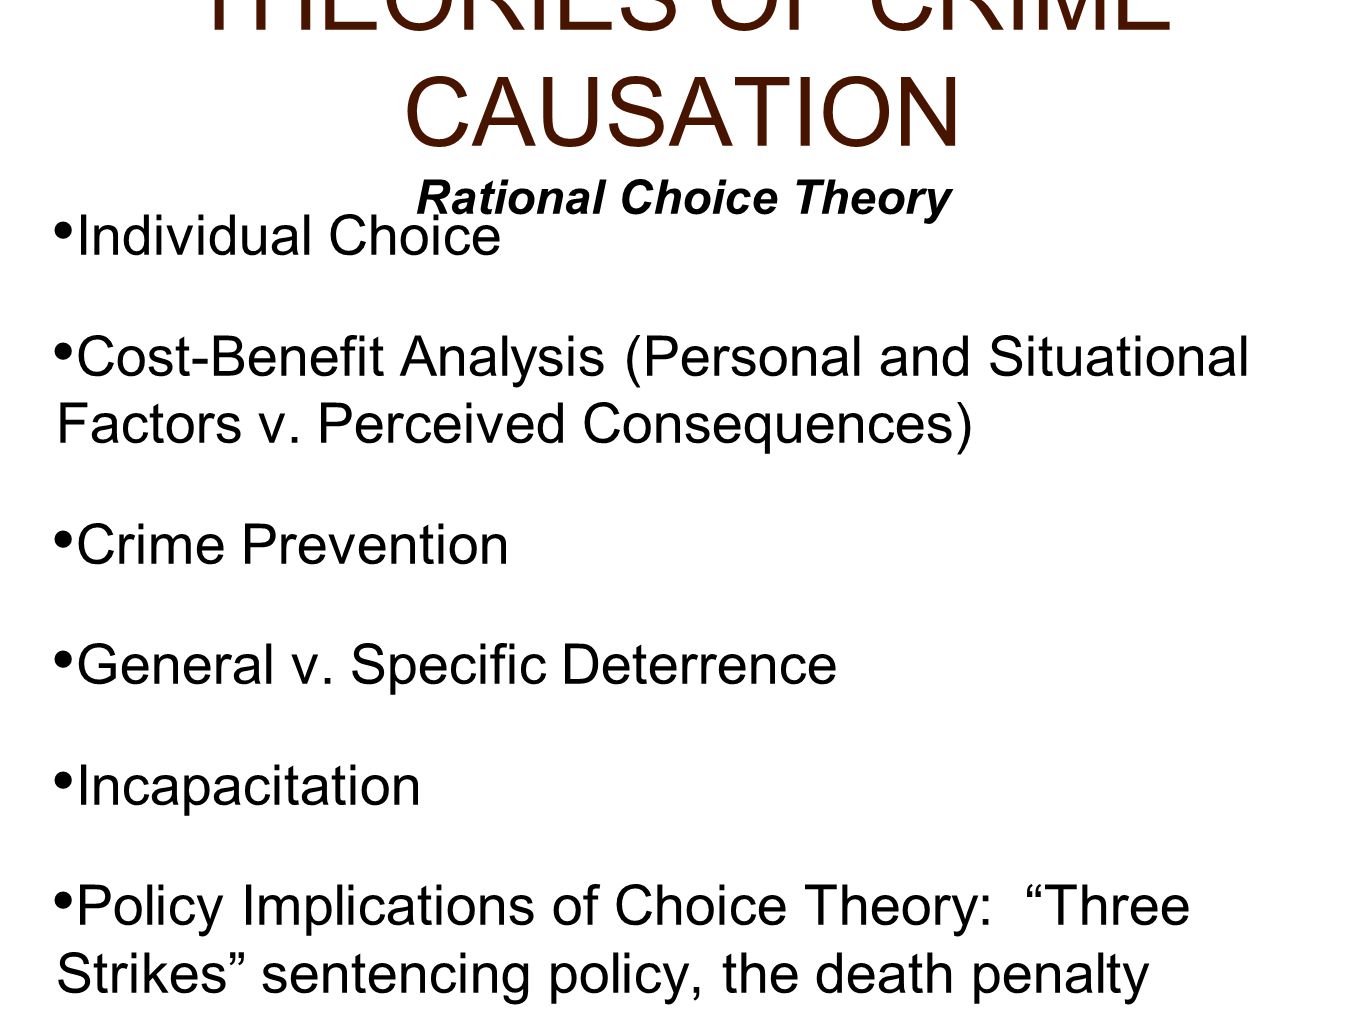 CRIME CAUSATION: PSYCHOLOGICAL THEORIES